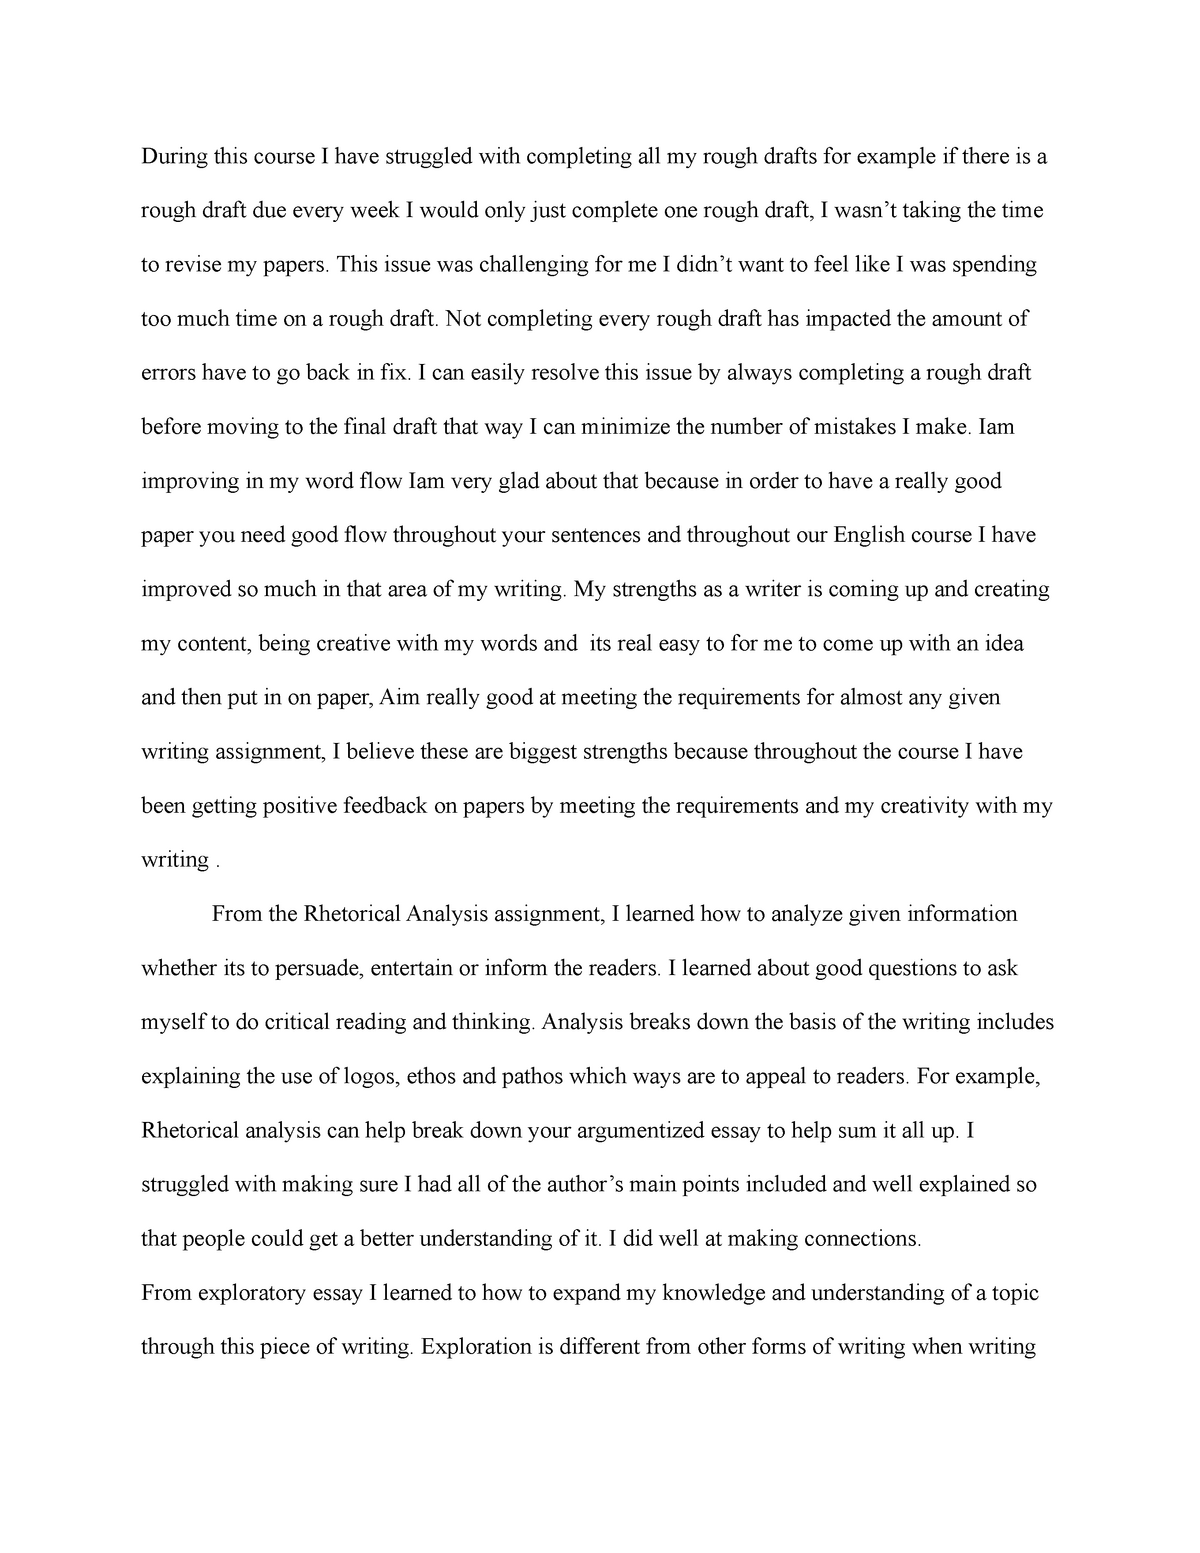 Reflection Essay Final Draft - ENGL23 - English Composition - UC